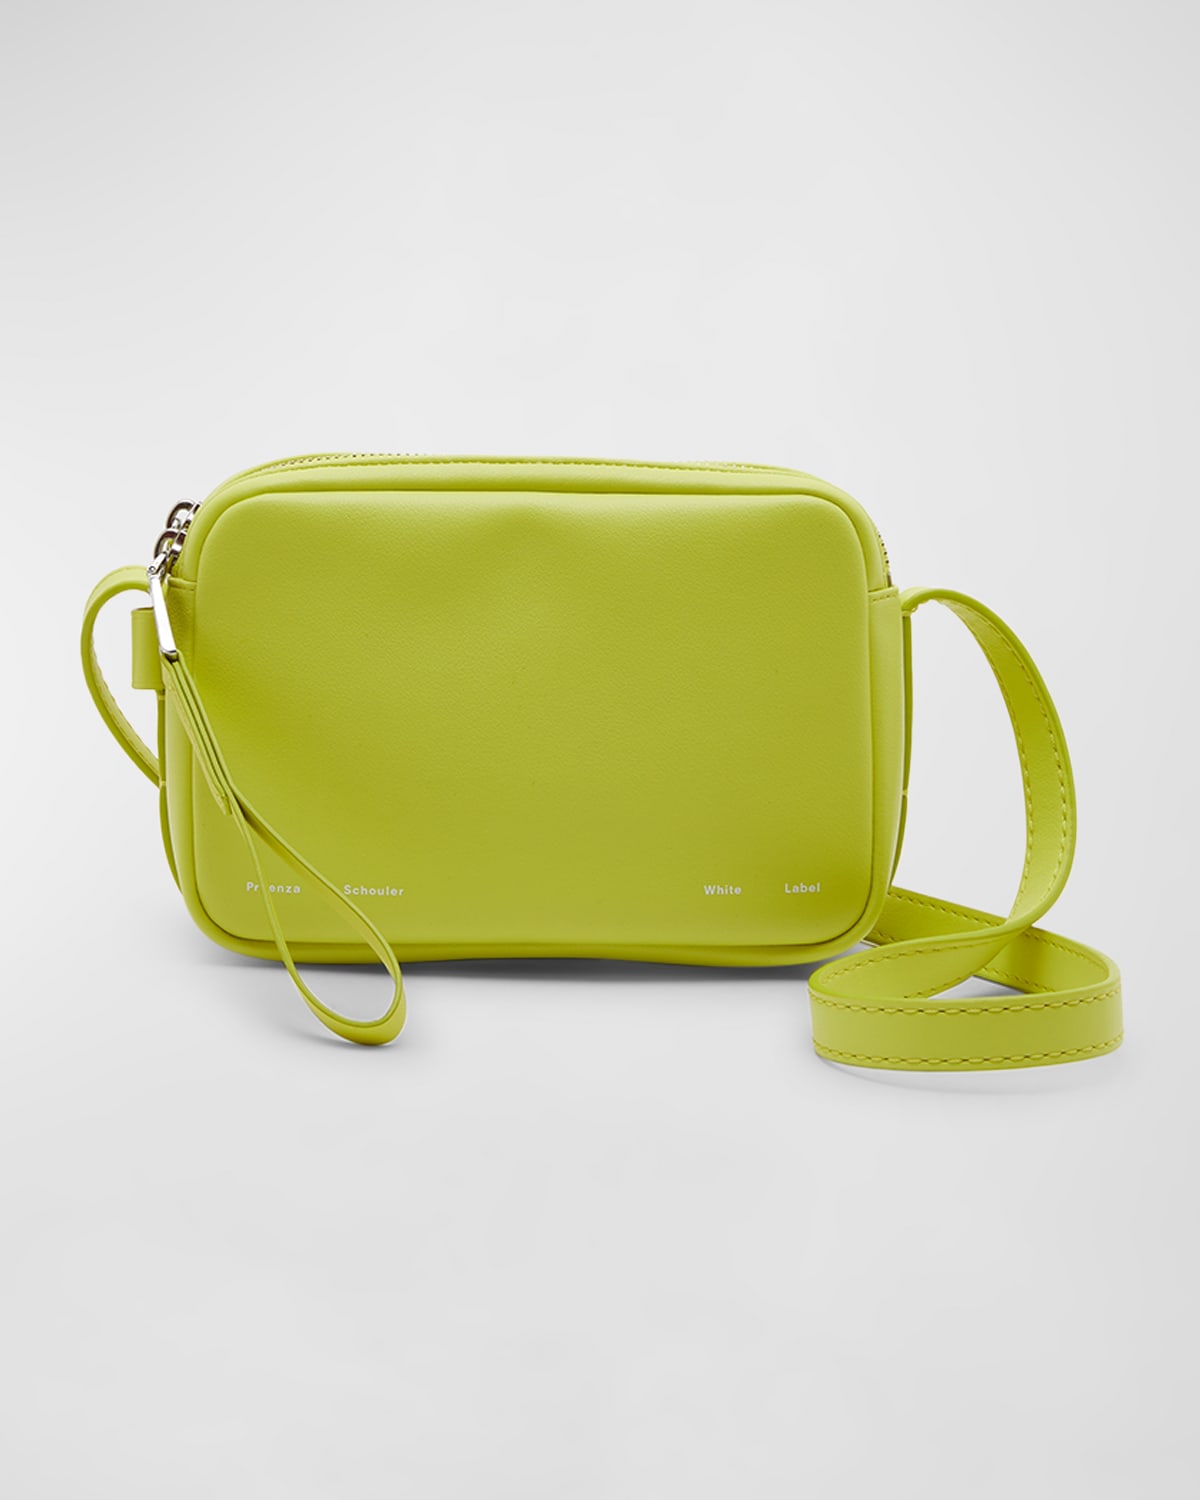 Proenza Schouler White Label Watts Leather Camera Shoulder Bag In 322 Lime